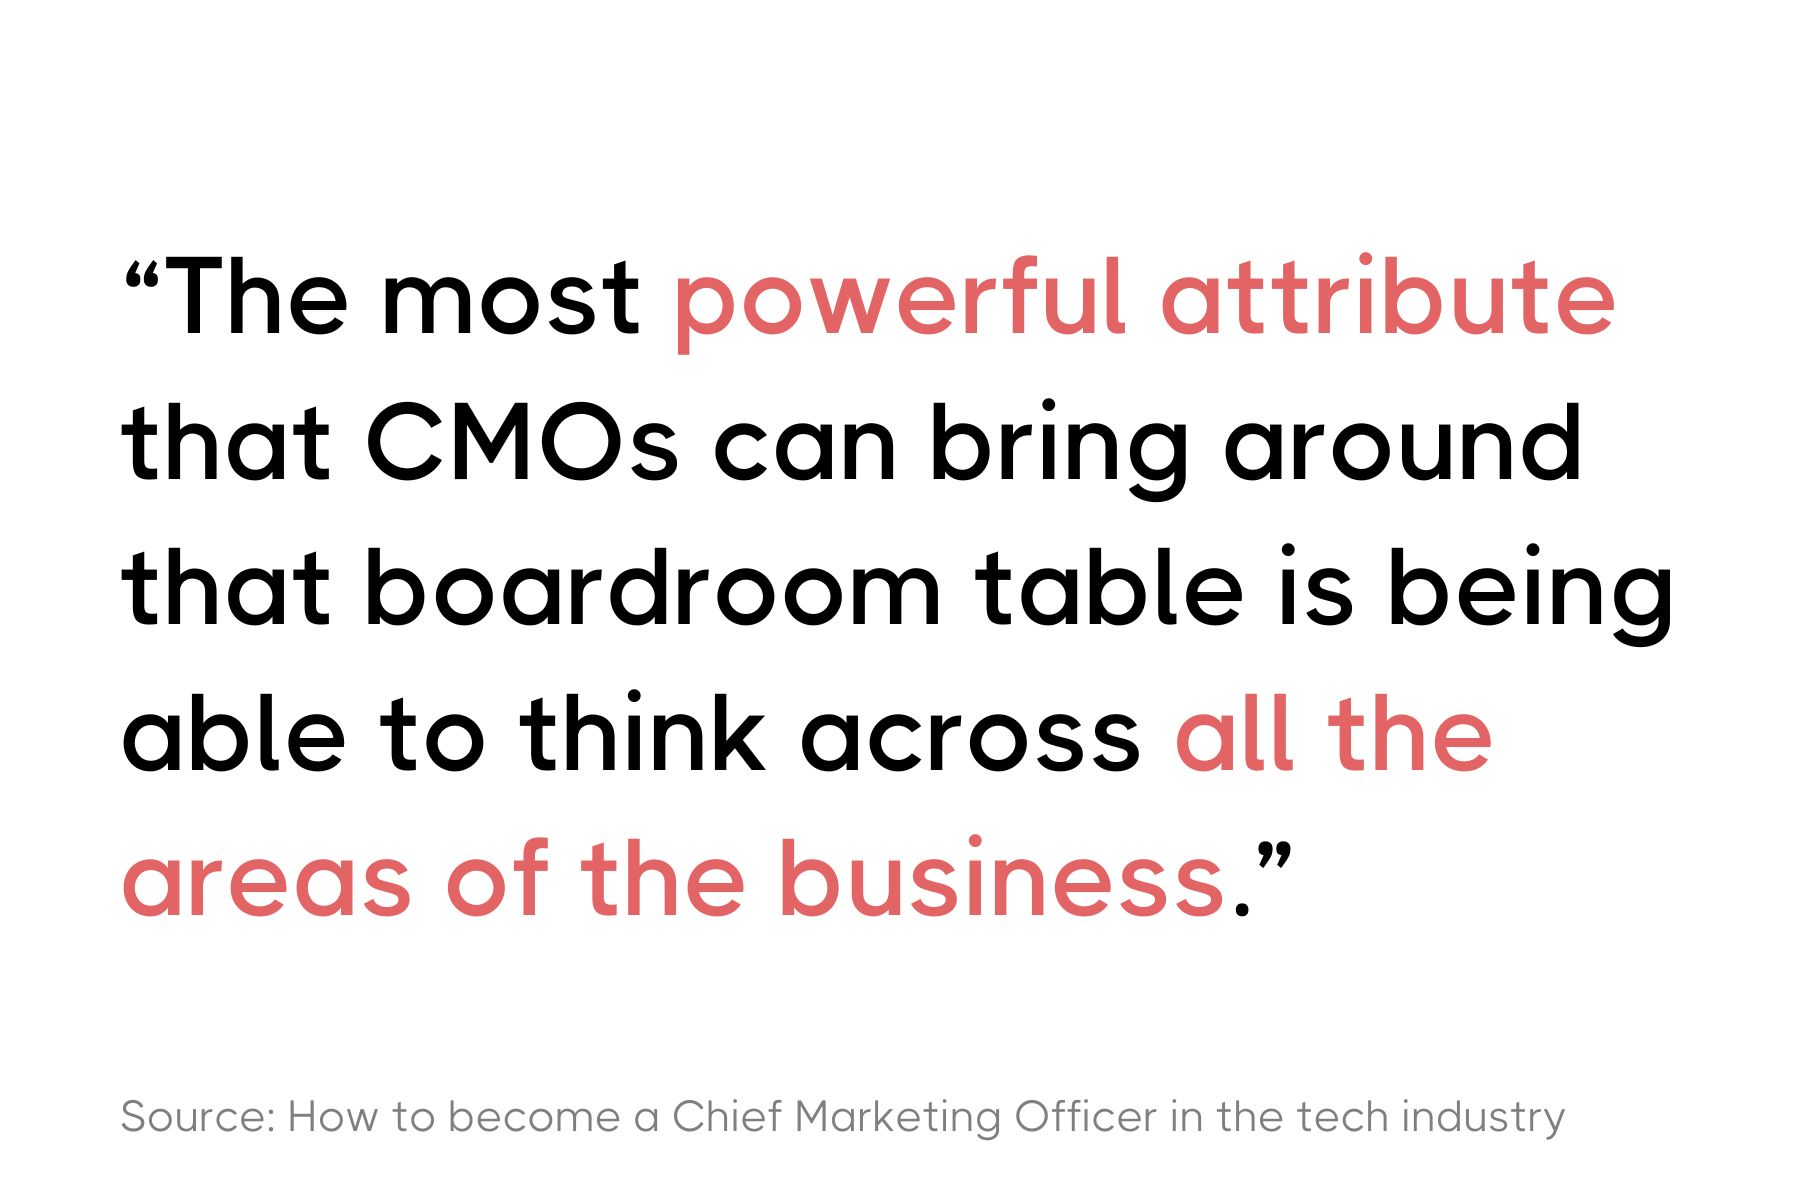 The image contains a quote in a large, bold, sans-serif font, primarily in black with the words "most powerful attribute" emphasized in red. The quote reads: "The most powerful attribute that CMOs can bring around that boardroom table is being able to think across all the areas of the business." At the bottom in smaller text, there is a source attribution that says "Source: How to become a Chief Marketing Officer in the tech industry."